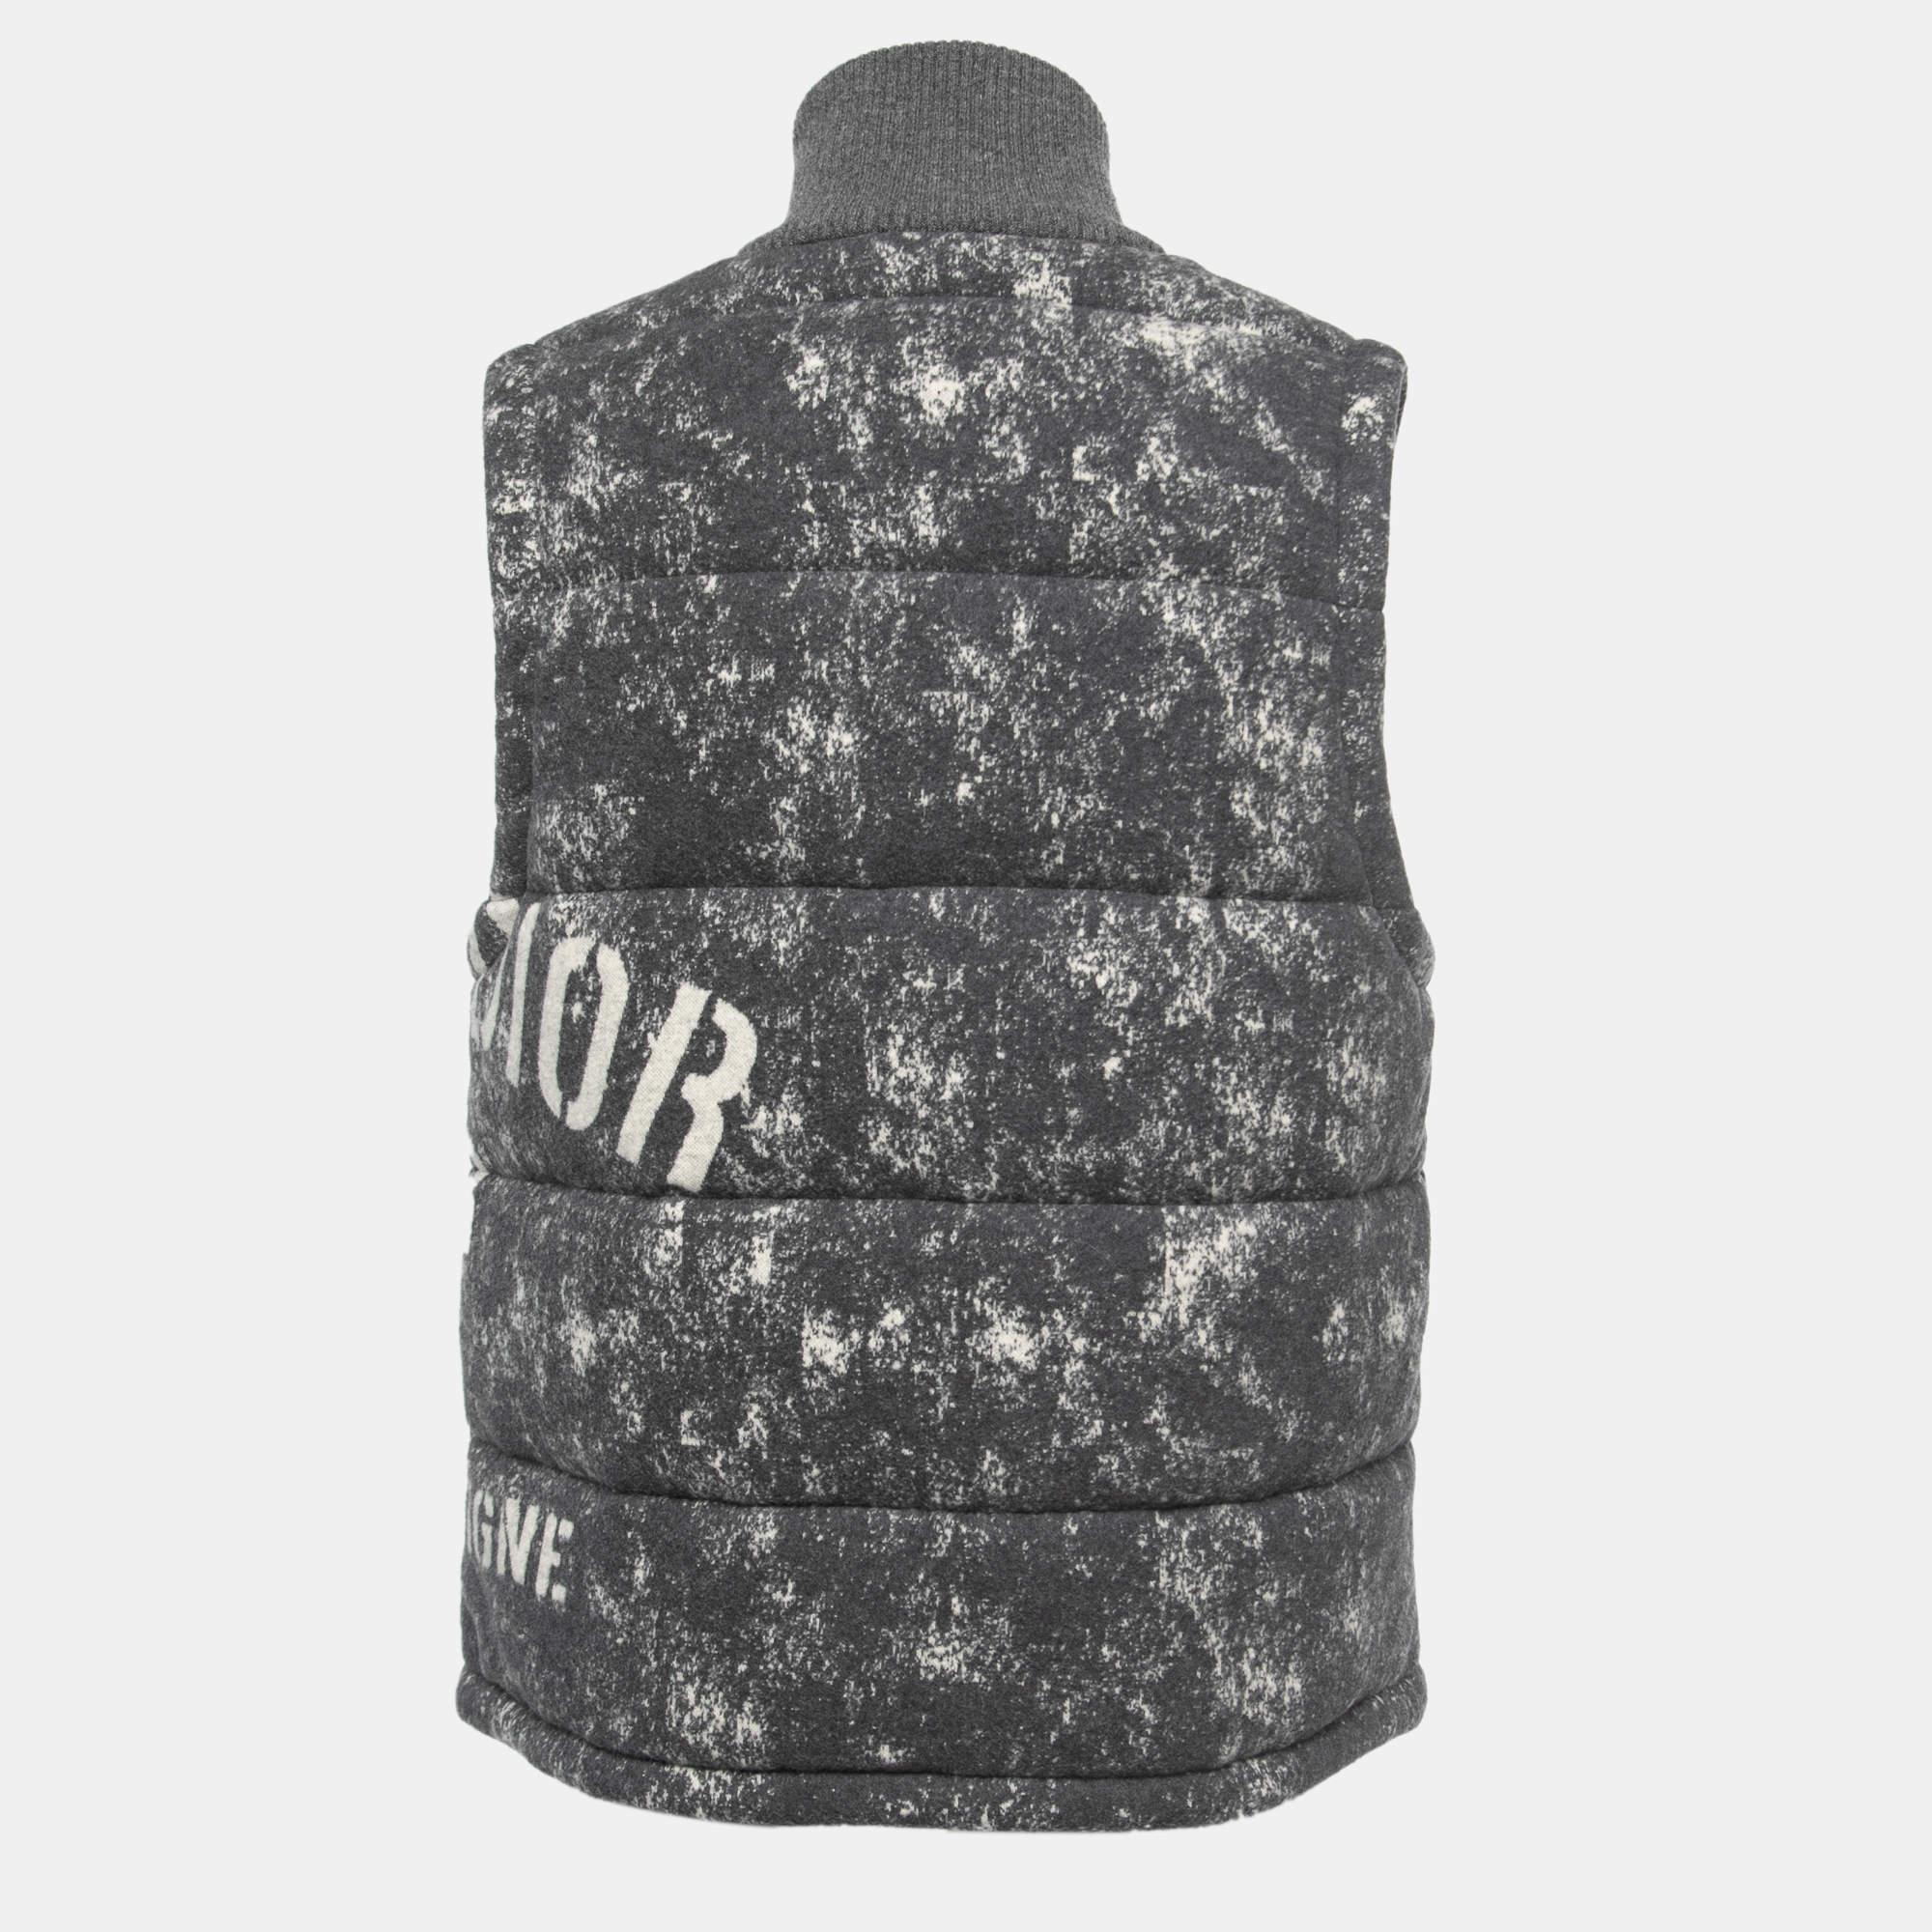 The Dior vest is a stylish and cozy outerwear piece. Crafted from high-quality cotton fleece material, it features a sleek grey color and Dior's signature print. This sleeveless vest offers warmth and fashion-forward design, making it a versatile